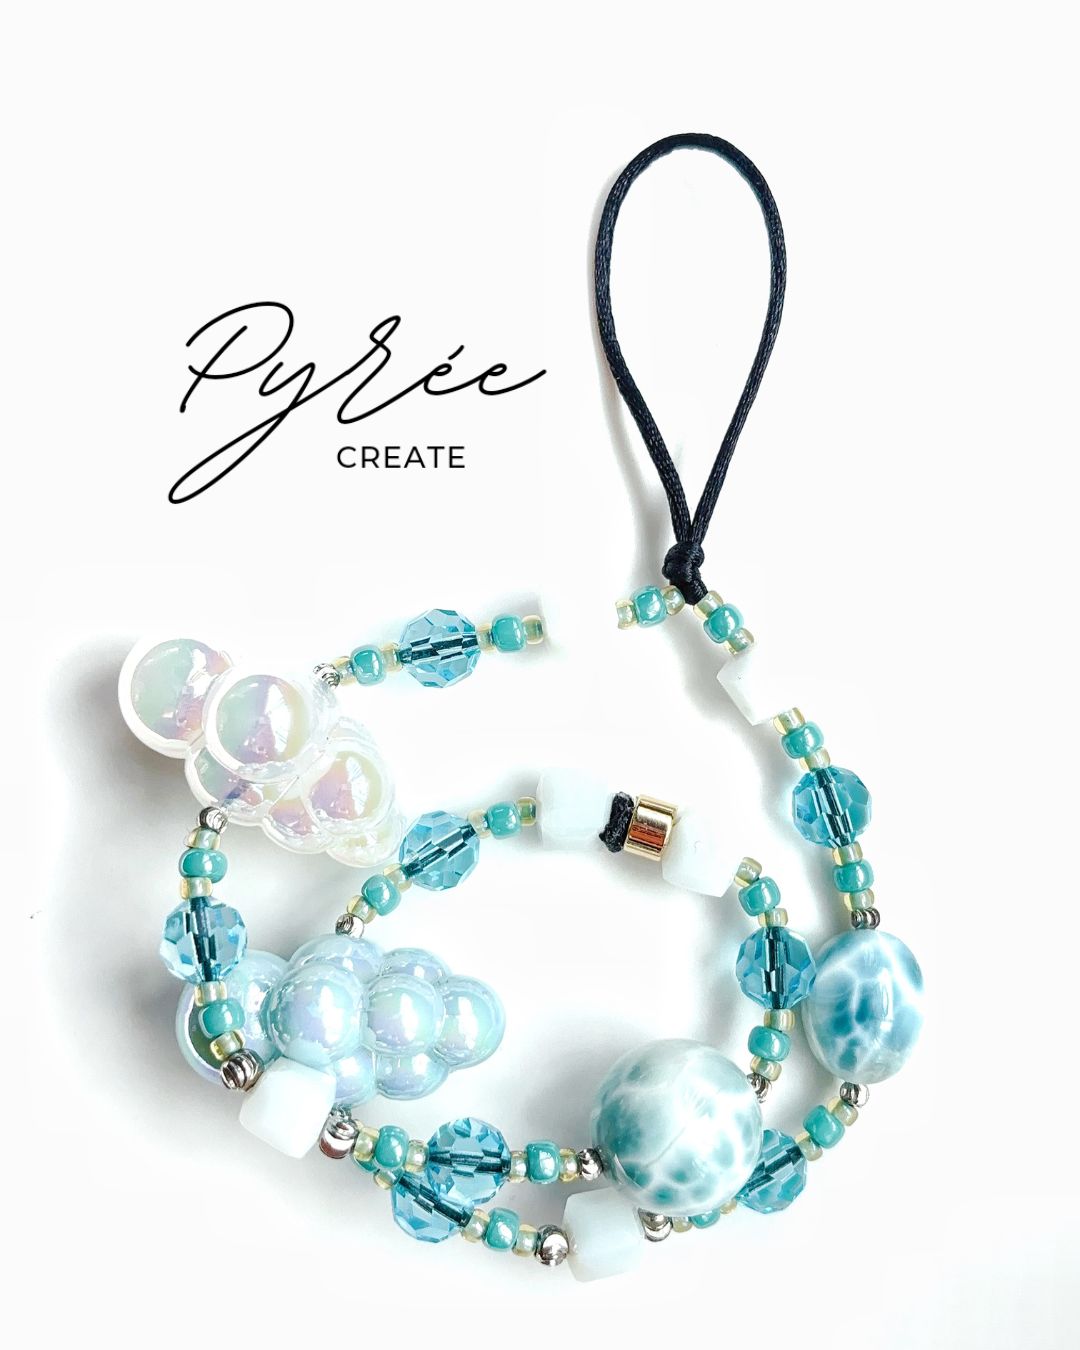 [One & Only] Dominican Sky - Larimar